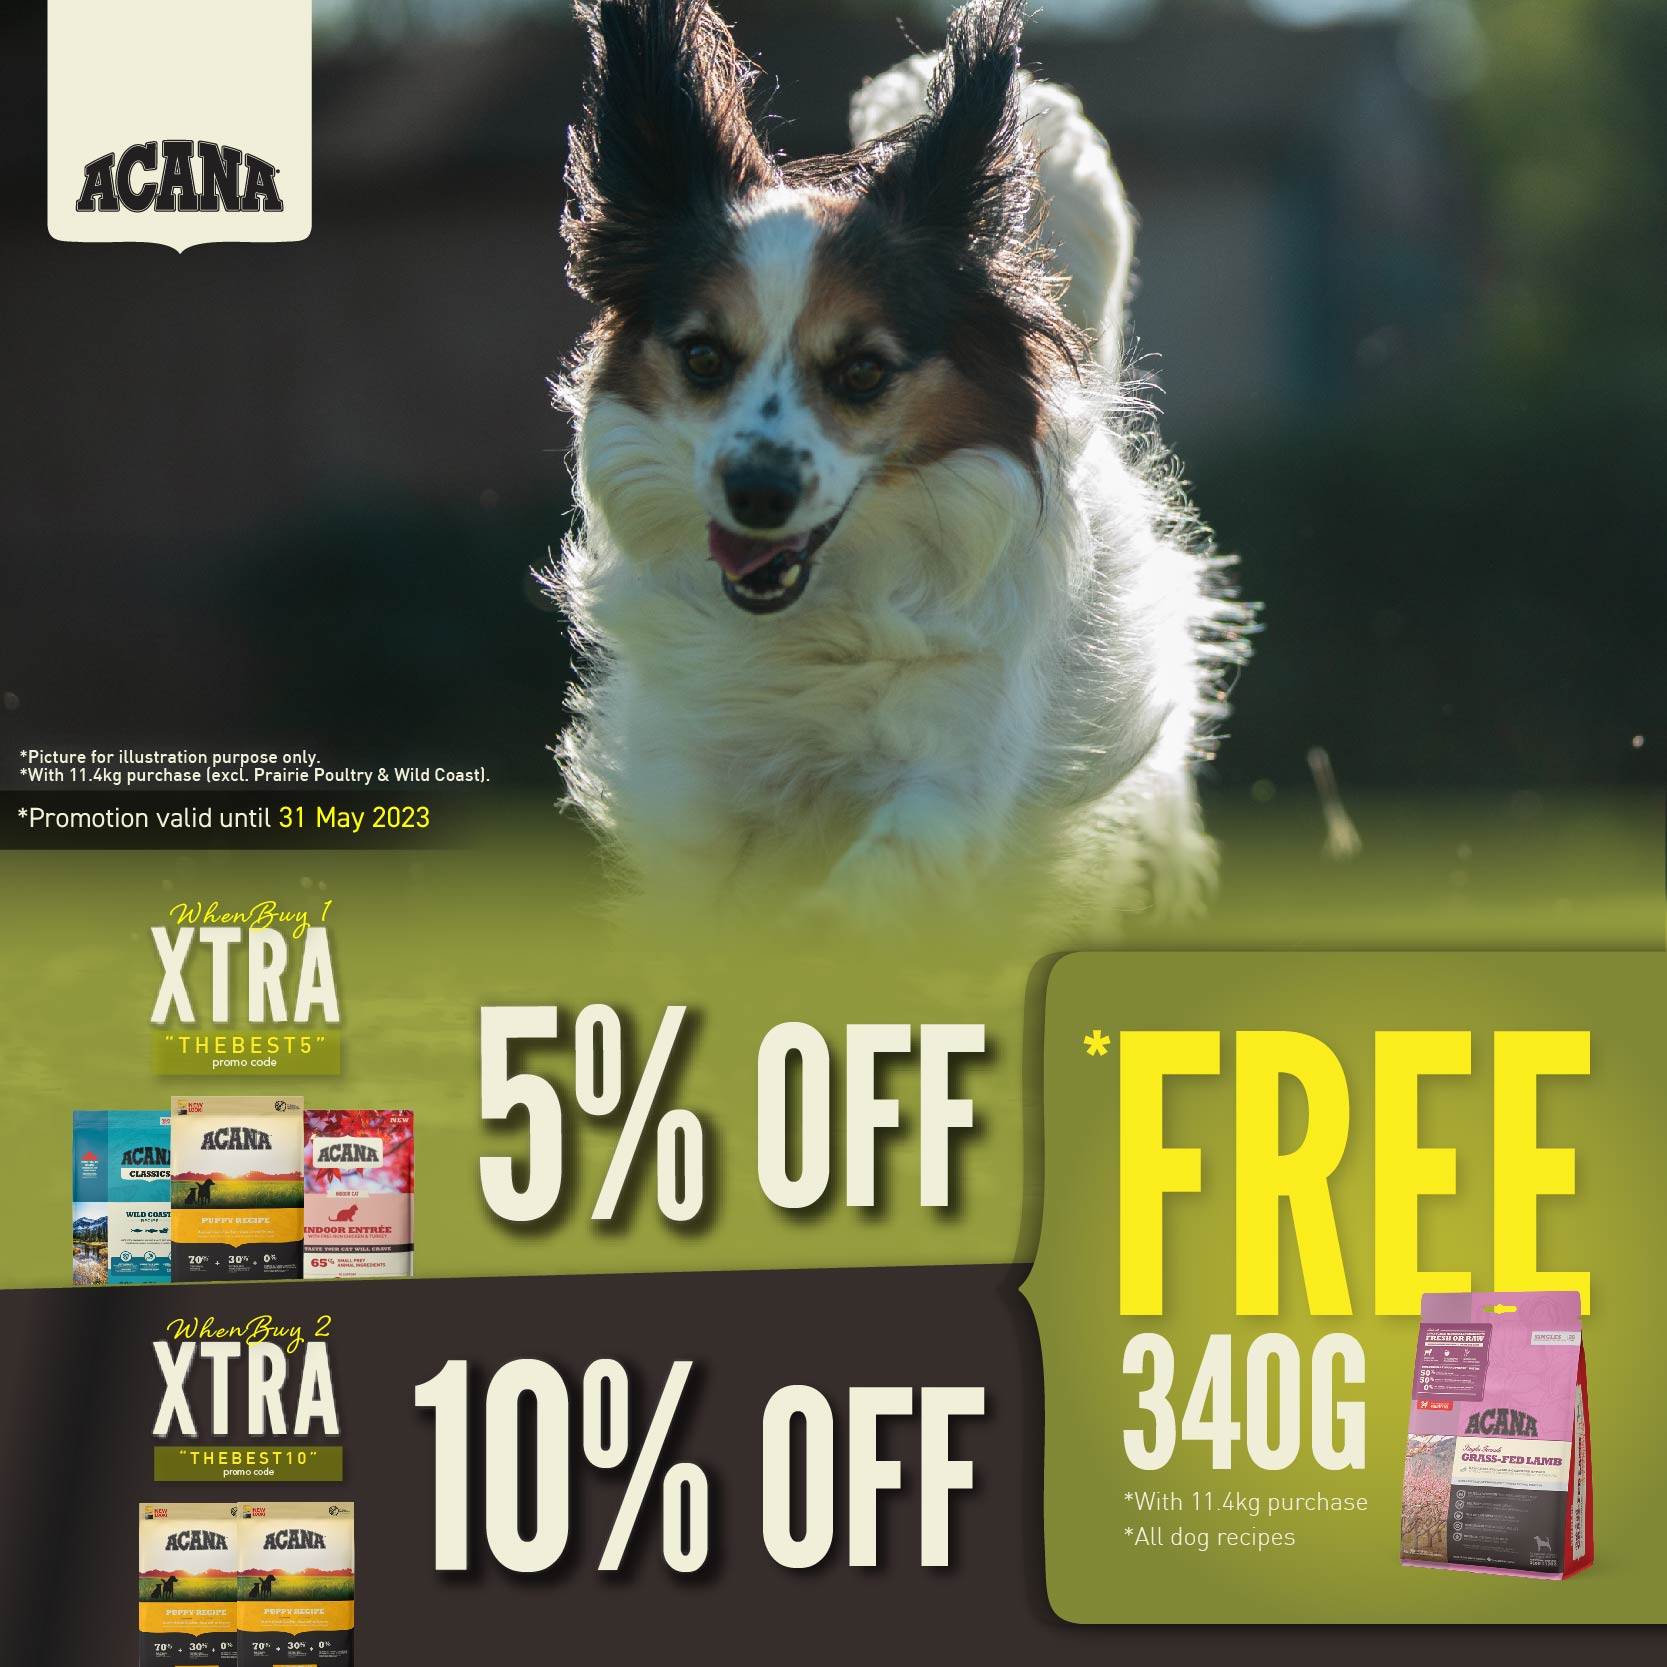 ACANA pet food promotion with free 340g for dog recipes of 11.4kg except for Prairie Poultry and Wild Coast..